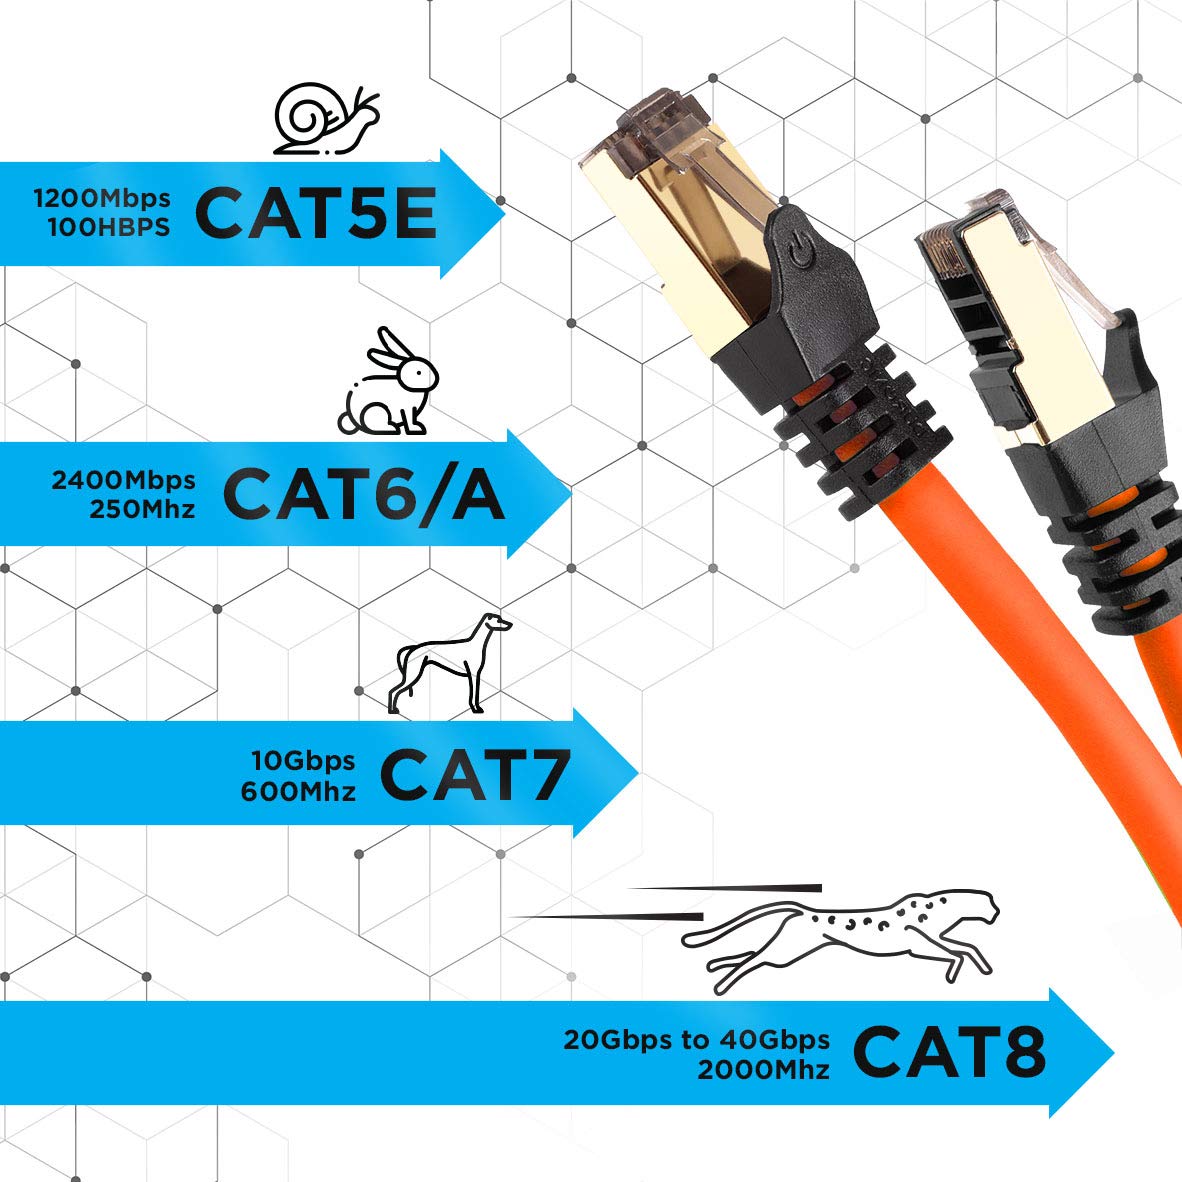 Duronic Ethernet Cable 2M High Speed CAT 8 Patch Network Shielded Lead 2GHz / 2000MHz / 40 Gigabit, CAT8 SFTP Wire, Snagless RJ45 Super-Fast Data - Orange